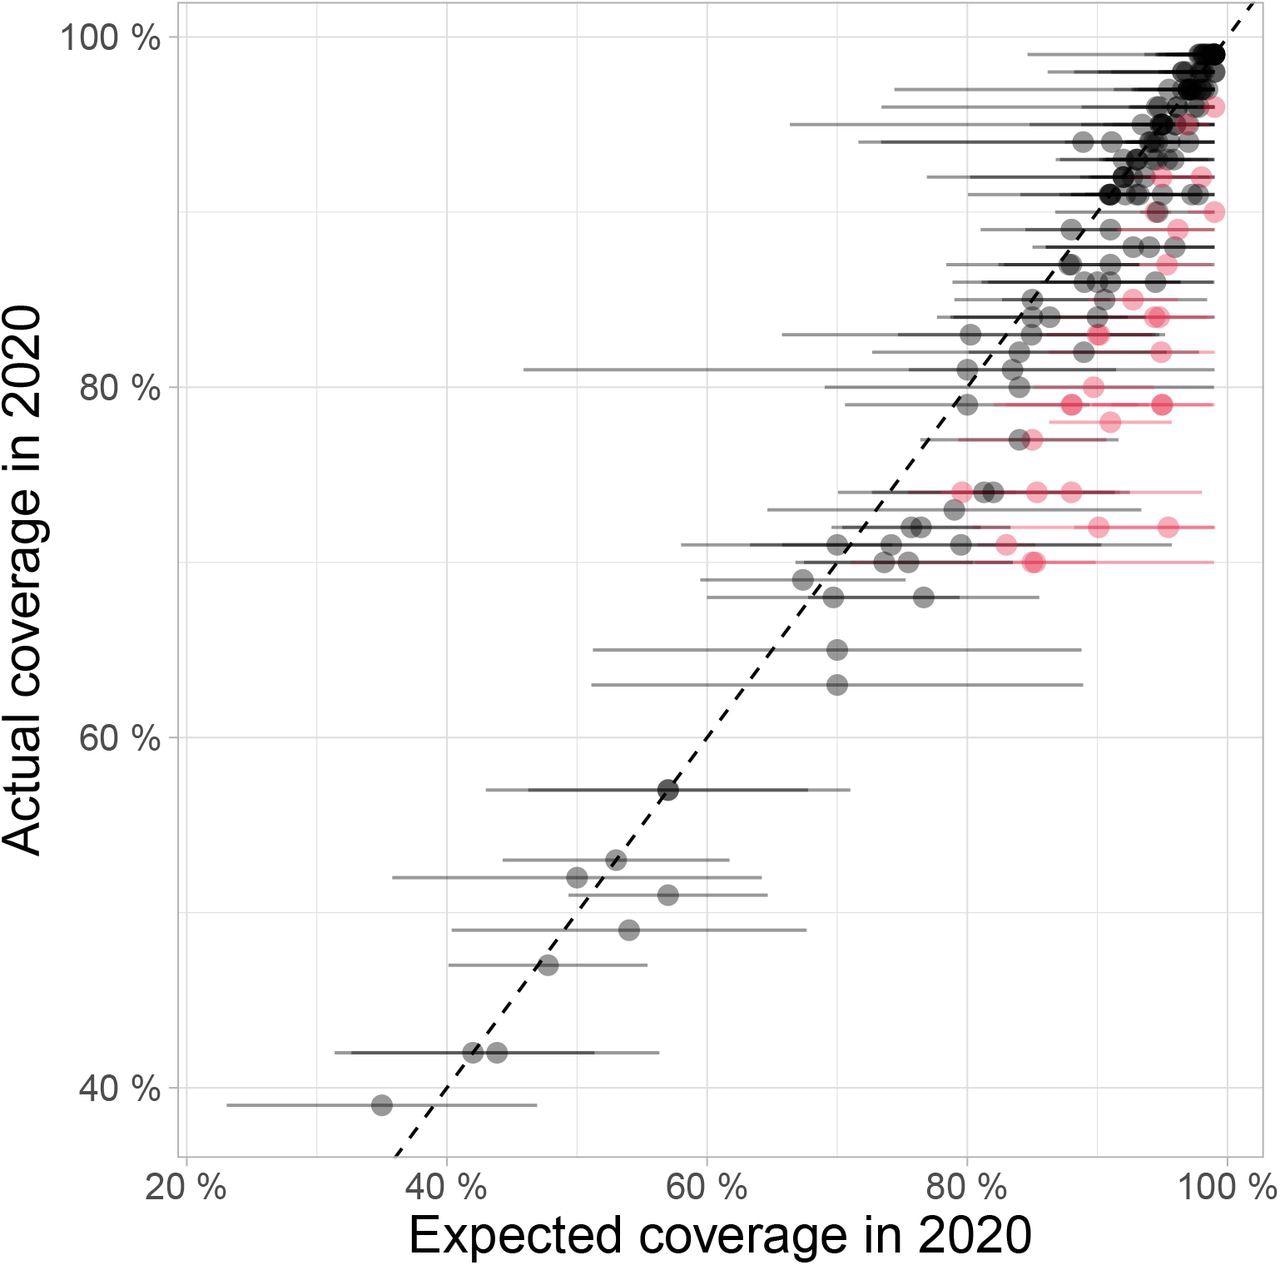 Comparison between 2020 WUENIC-reported DTP3 coverage and expectations derived from historical trends. This scatterplot shows country coverage (WUENIC-reported actuals and ARIMA-predicted expectations) as dots. Lines around individual points illustrate the 95% confidence intervals (CI) of ARIMA predictions. Countries showing significant departure from expected values, i.e., for which actual coverage is outside the 95% CI of predictions, are indicated in red.